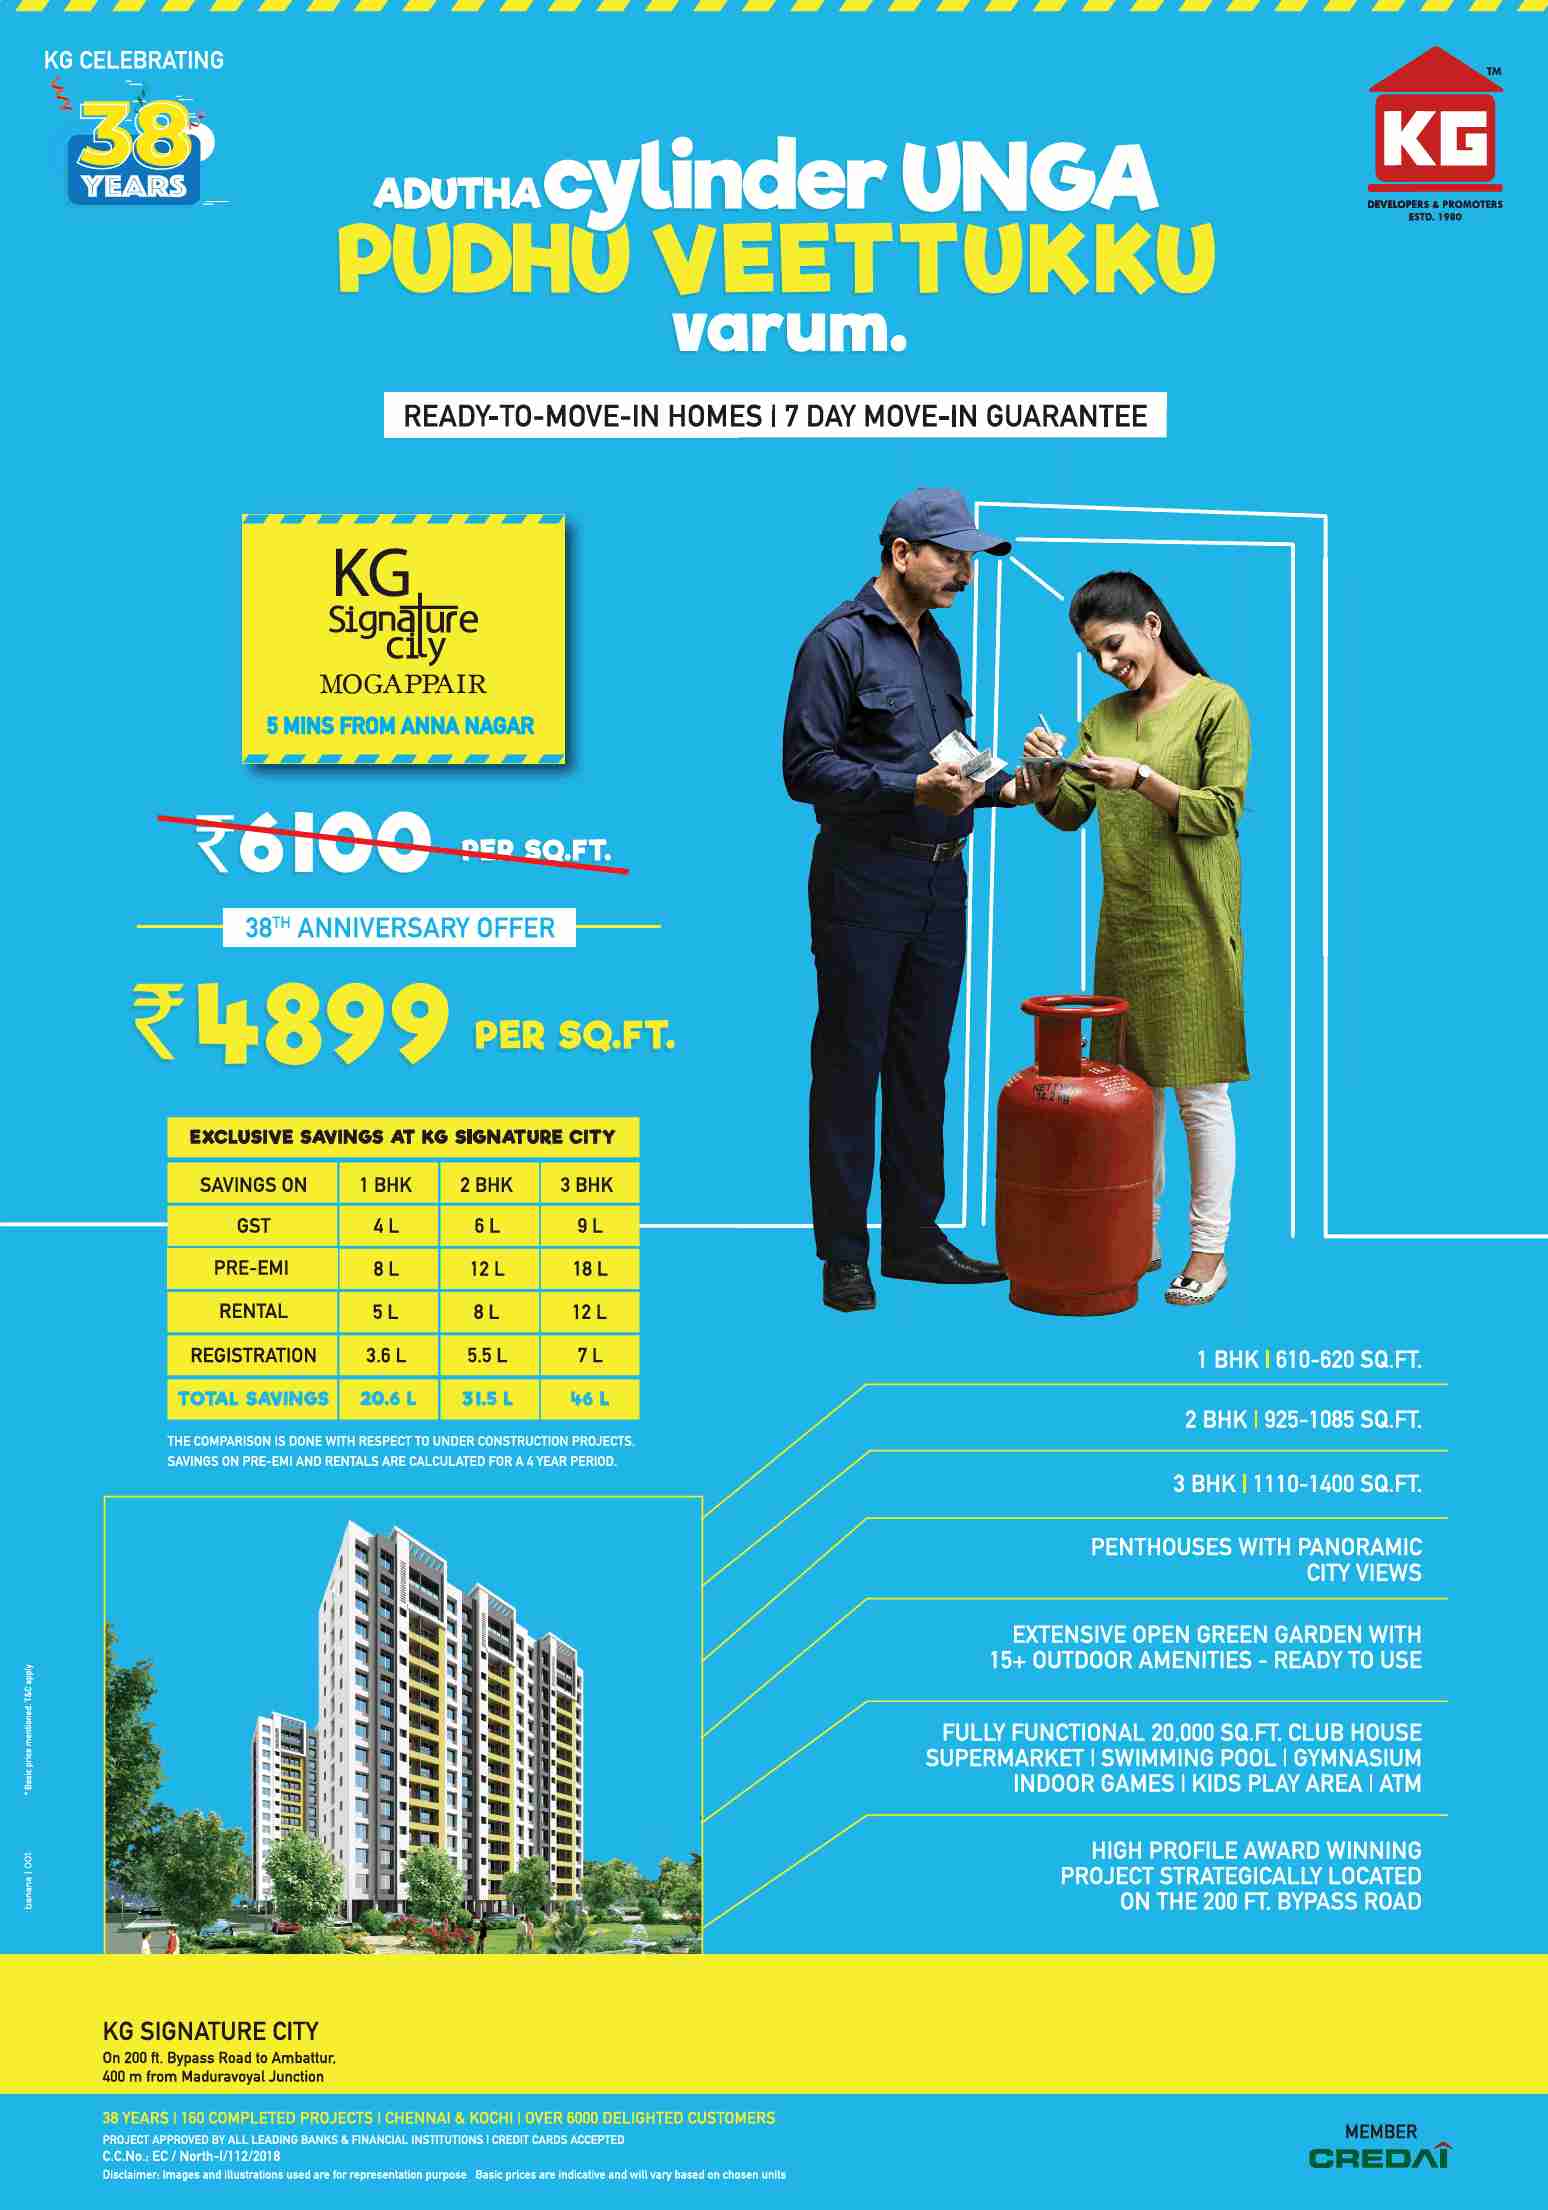 Book ready to move homes at Rs 4899 per sqft at KG Signature City in Chennai